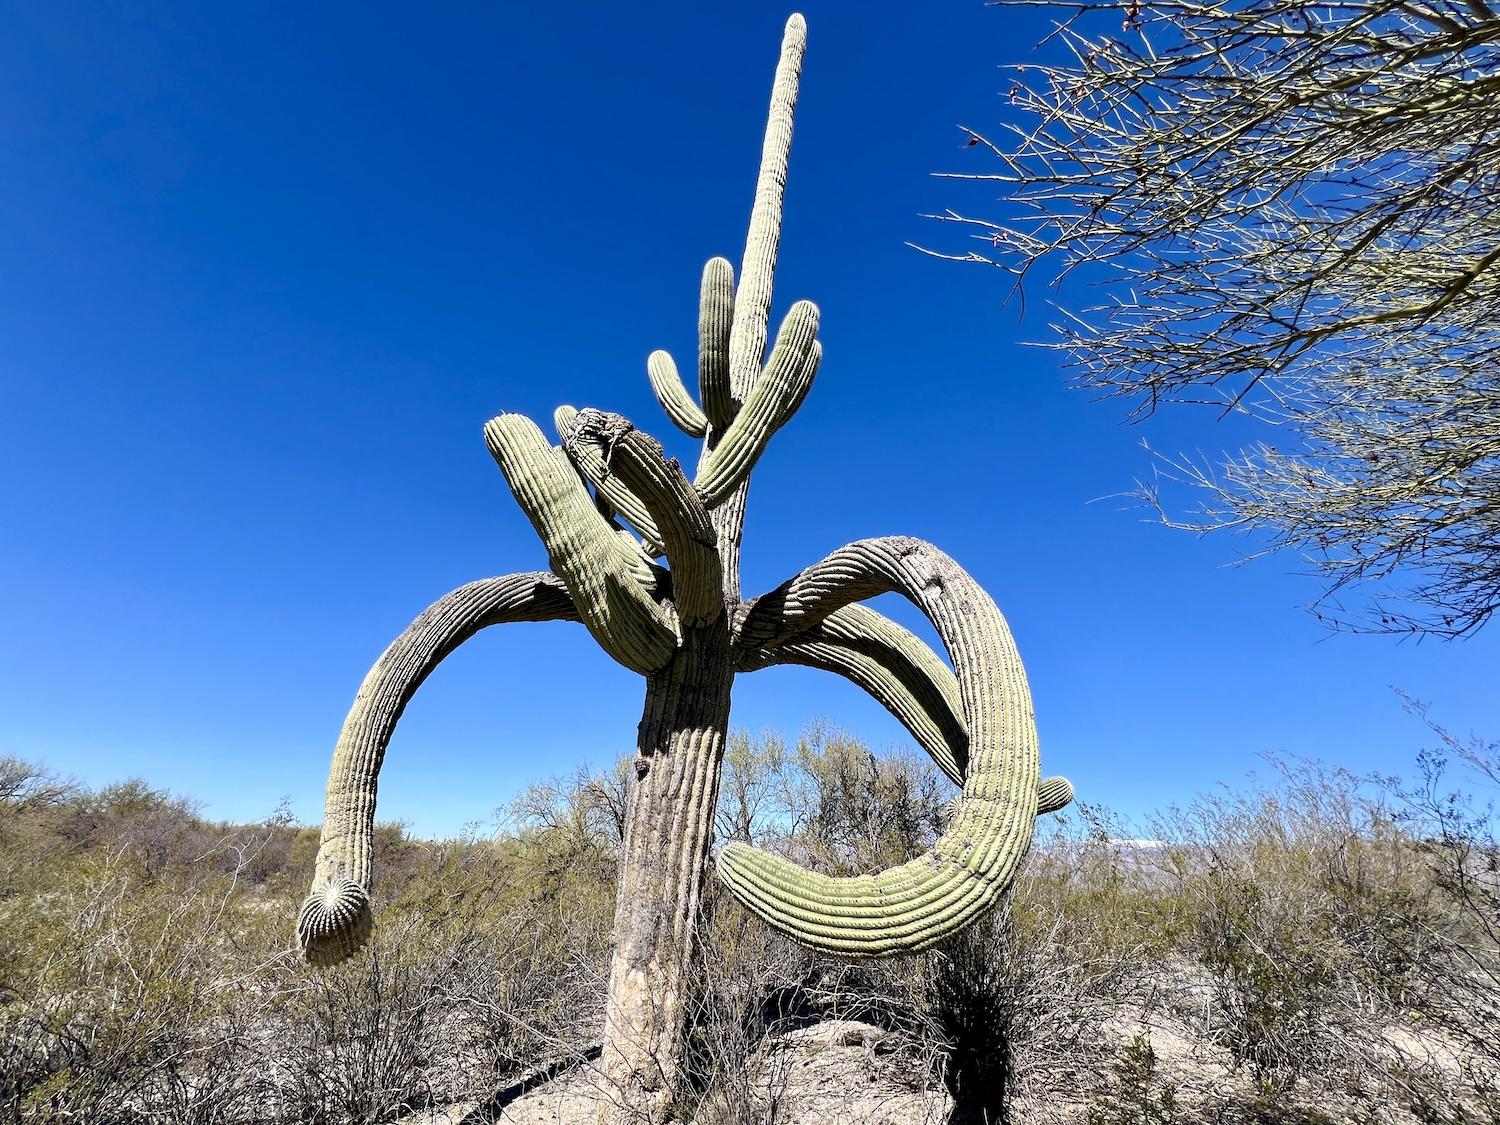 This gnarly saguaro seems to have 13 arms.